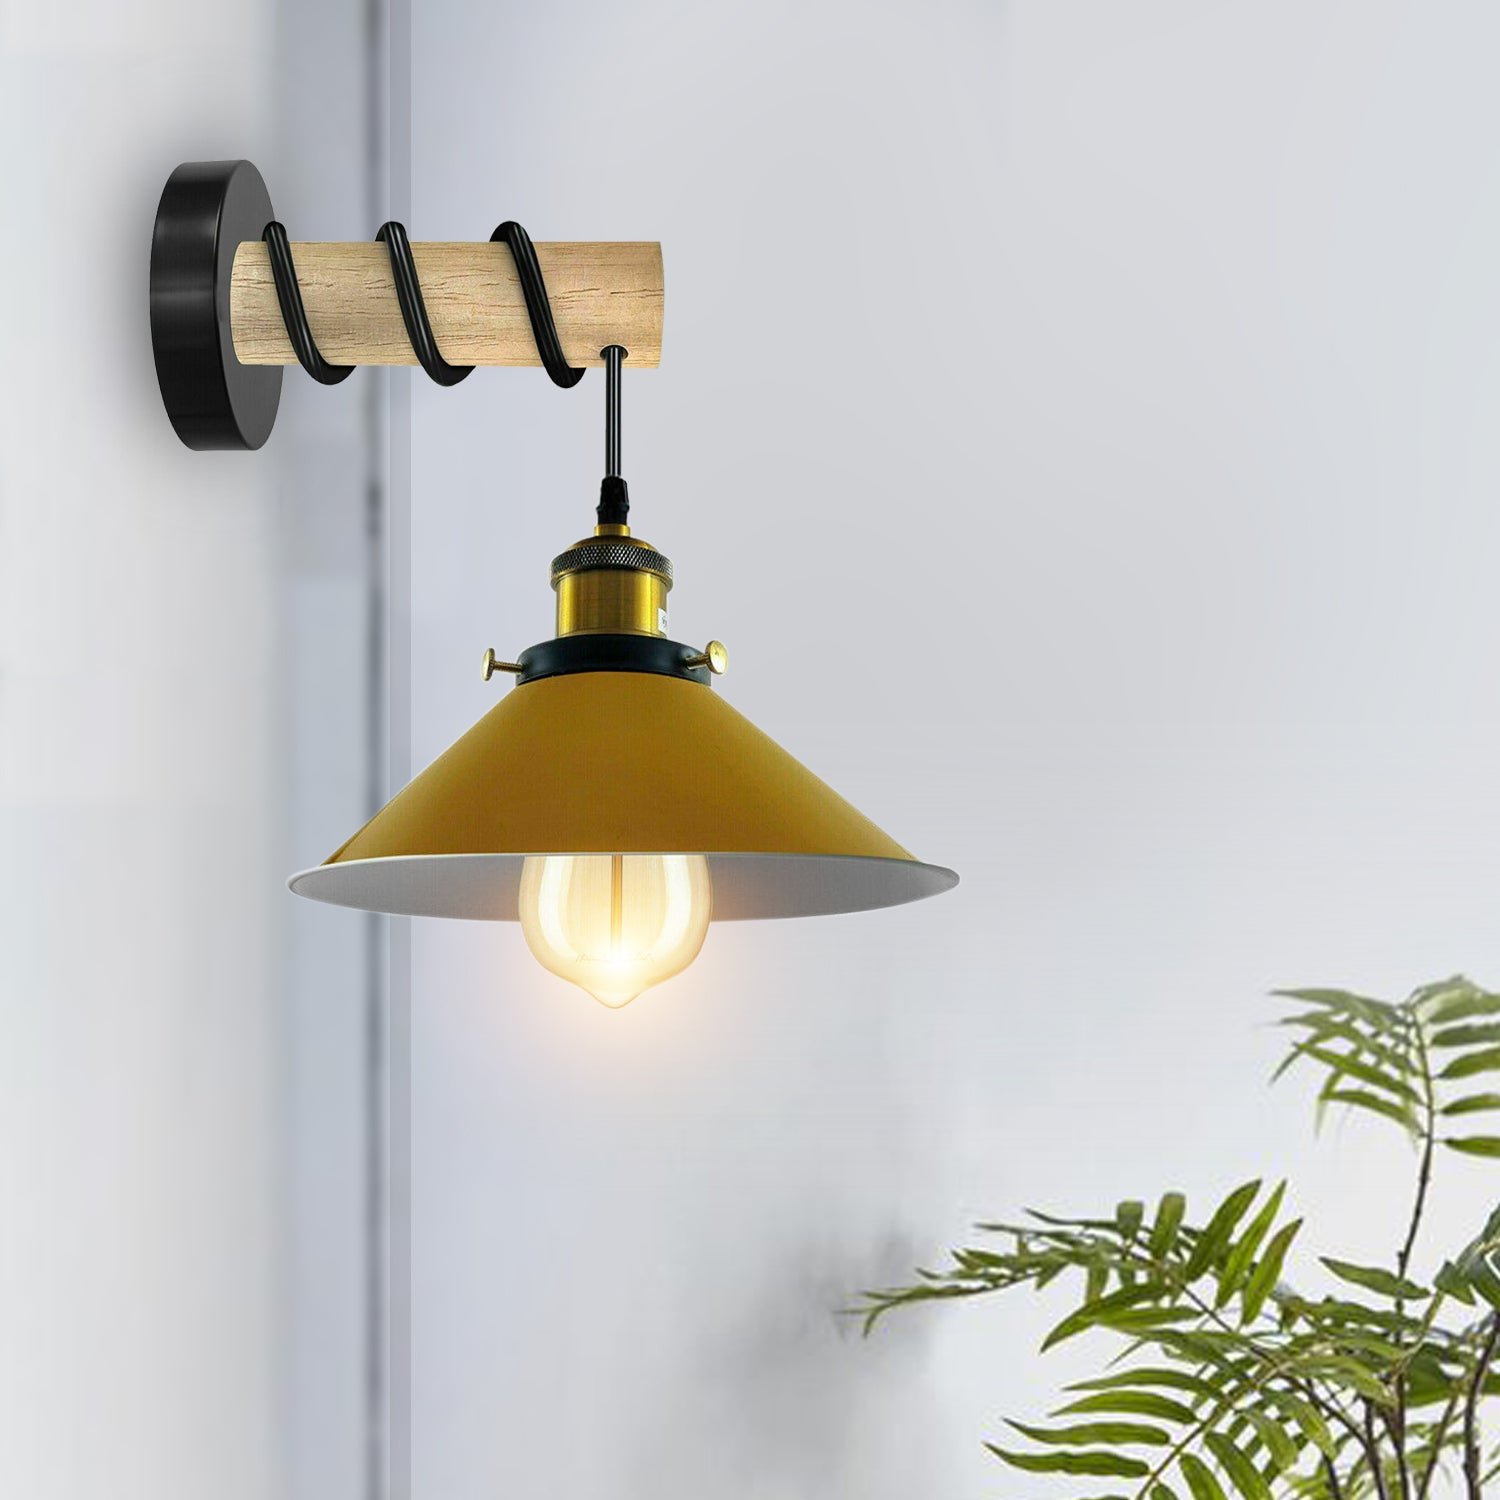 Modern Combined Solid Wooden Arm Chandelier Lighting With Yellow Cone Shaped Metal Shade wall sconce~3477 - LEDSone UK Ltd